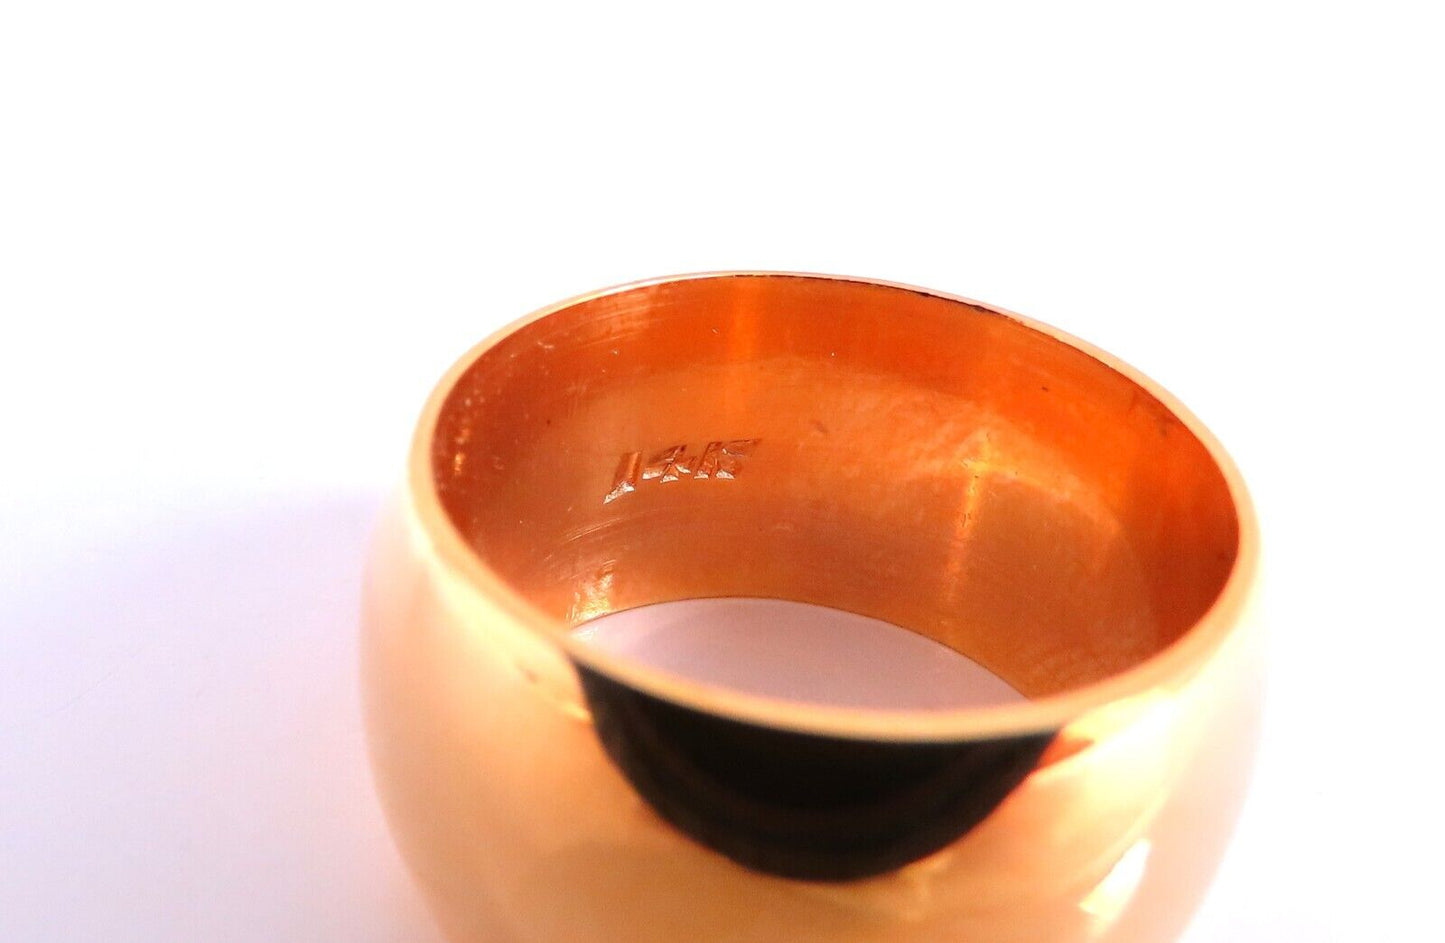 Wide Solid 11.5mm Band 14kt Gold Ring 8